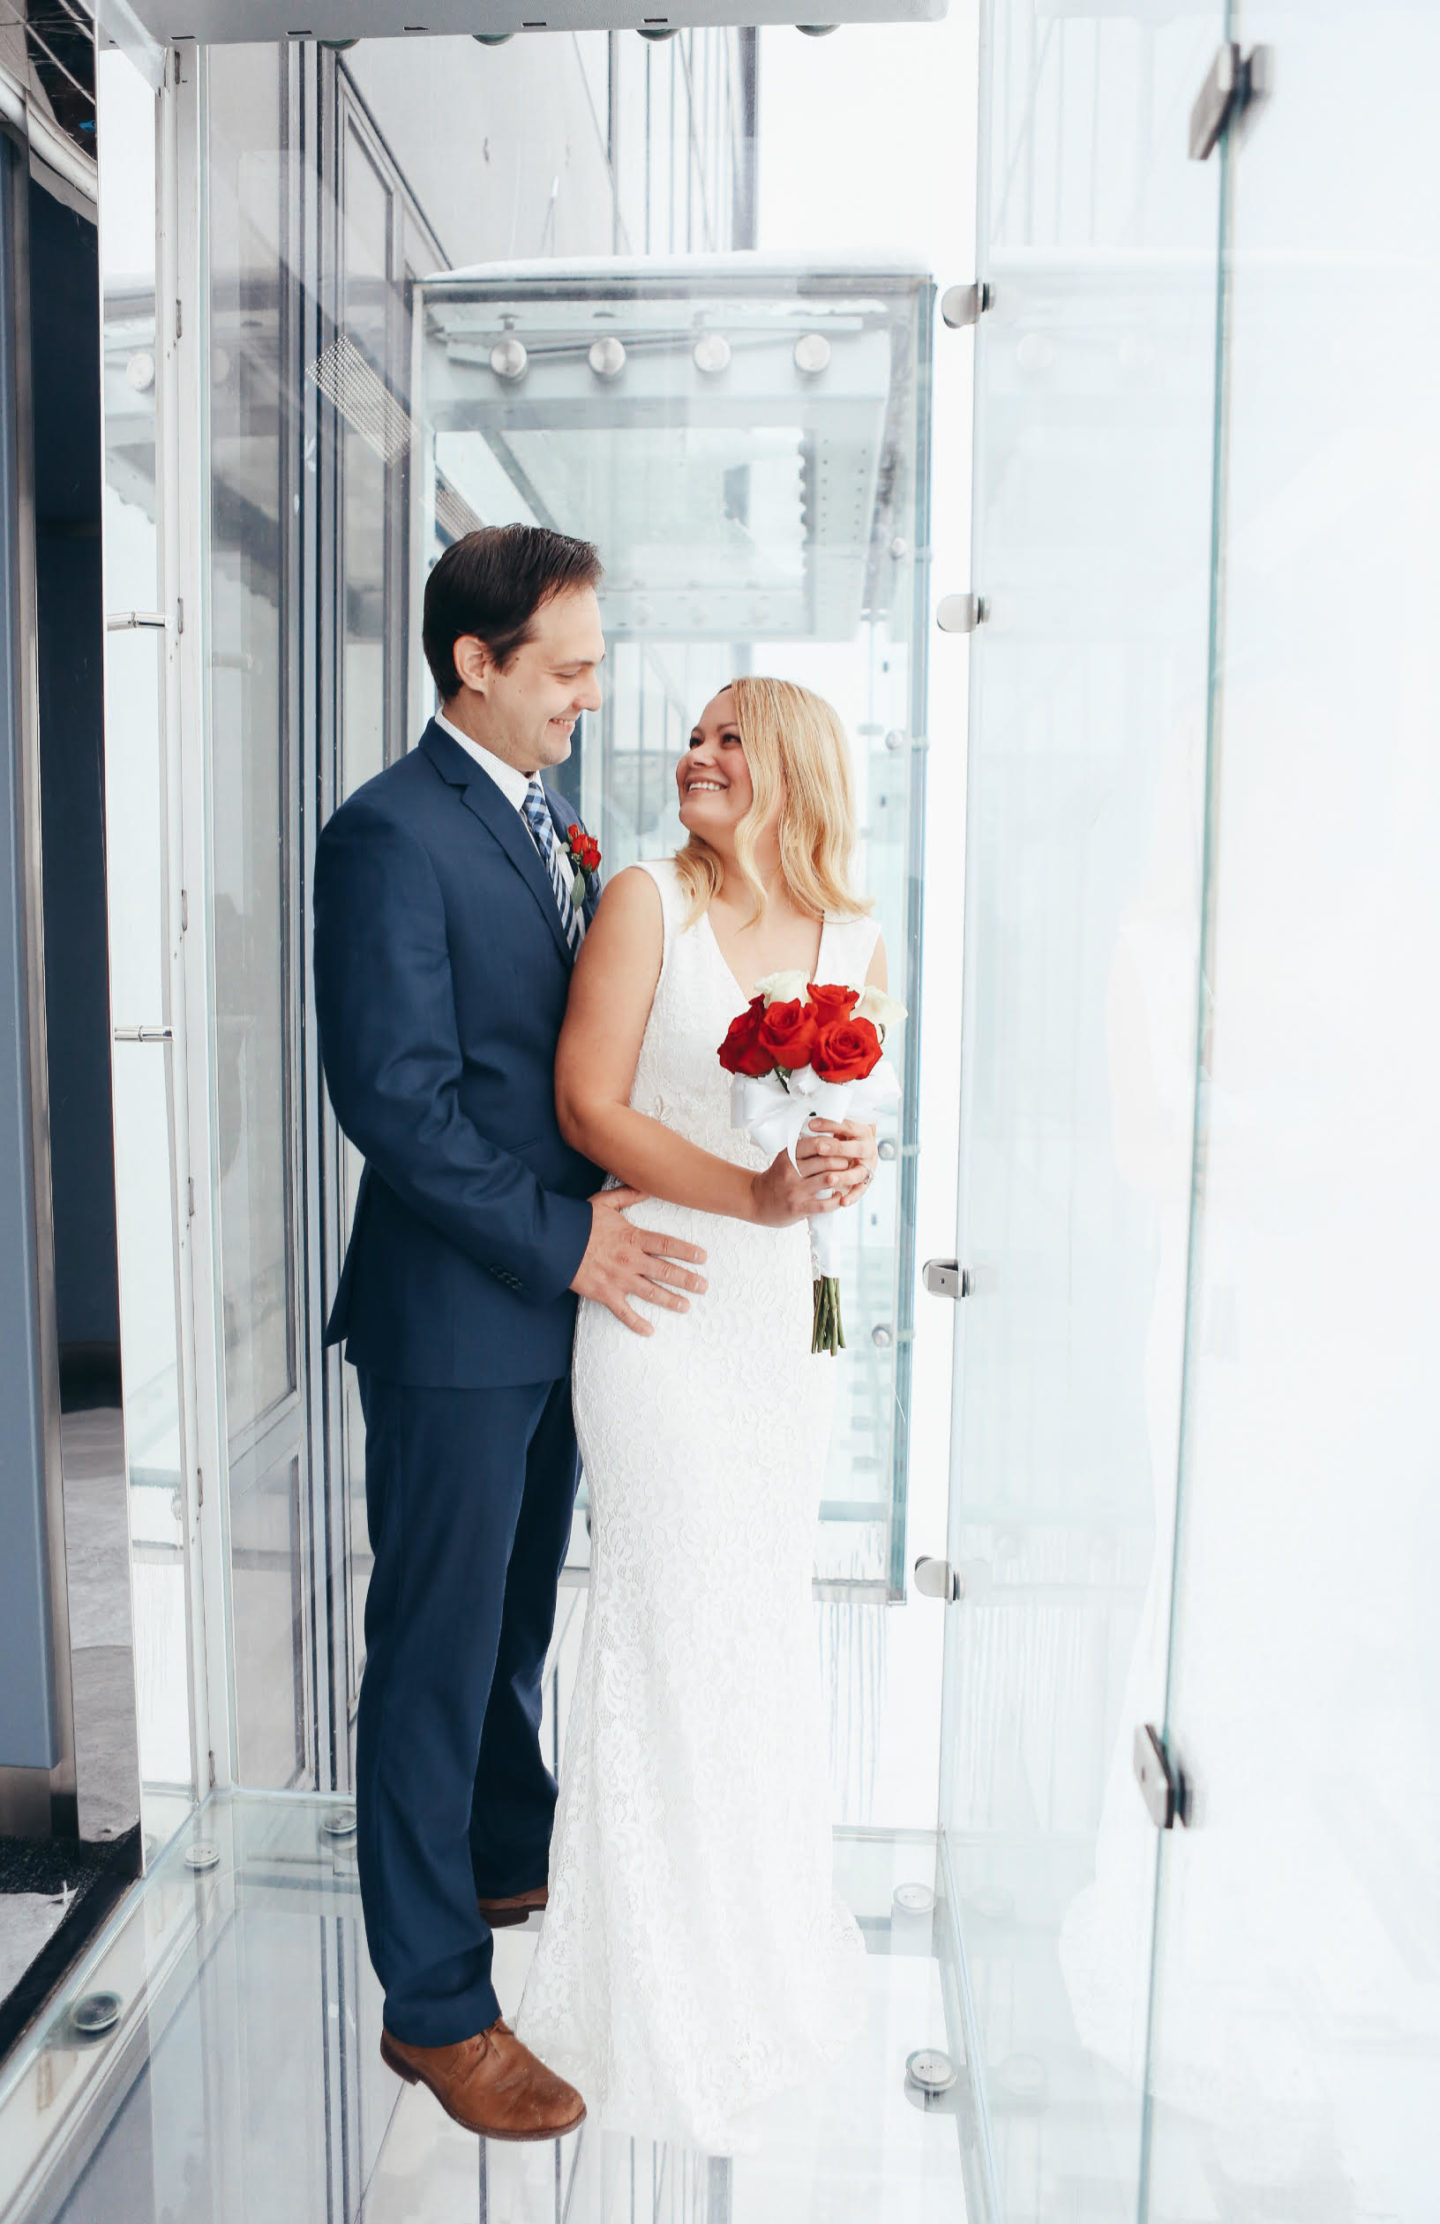 Vow-Renewal-Wedding-Skydeck-Chicago-Vanessa-Lambert-What-Would-V-Wear